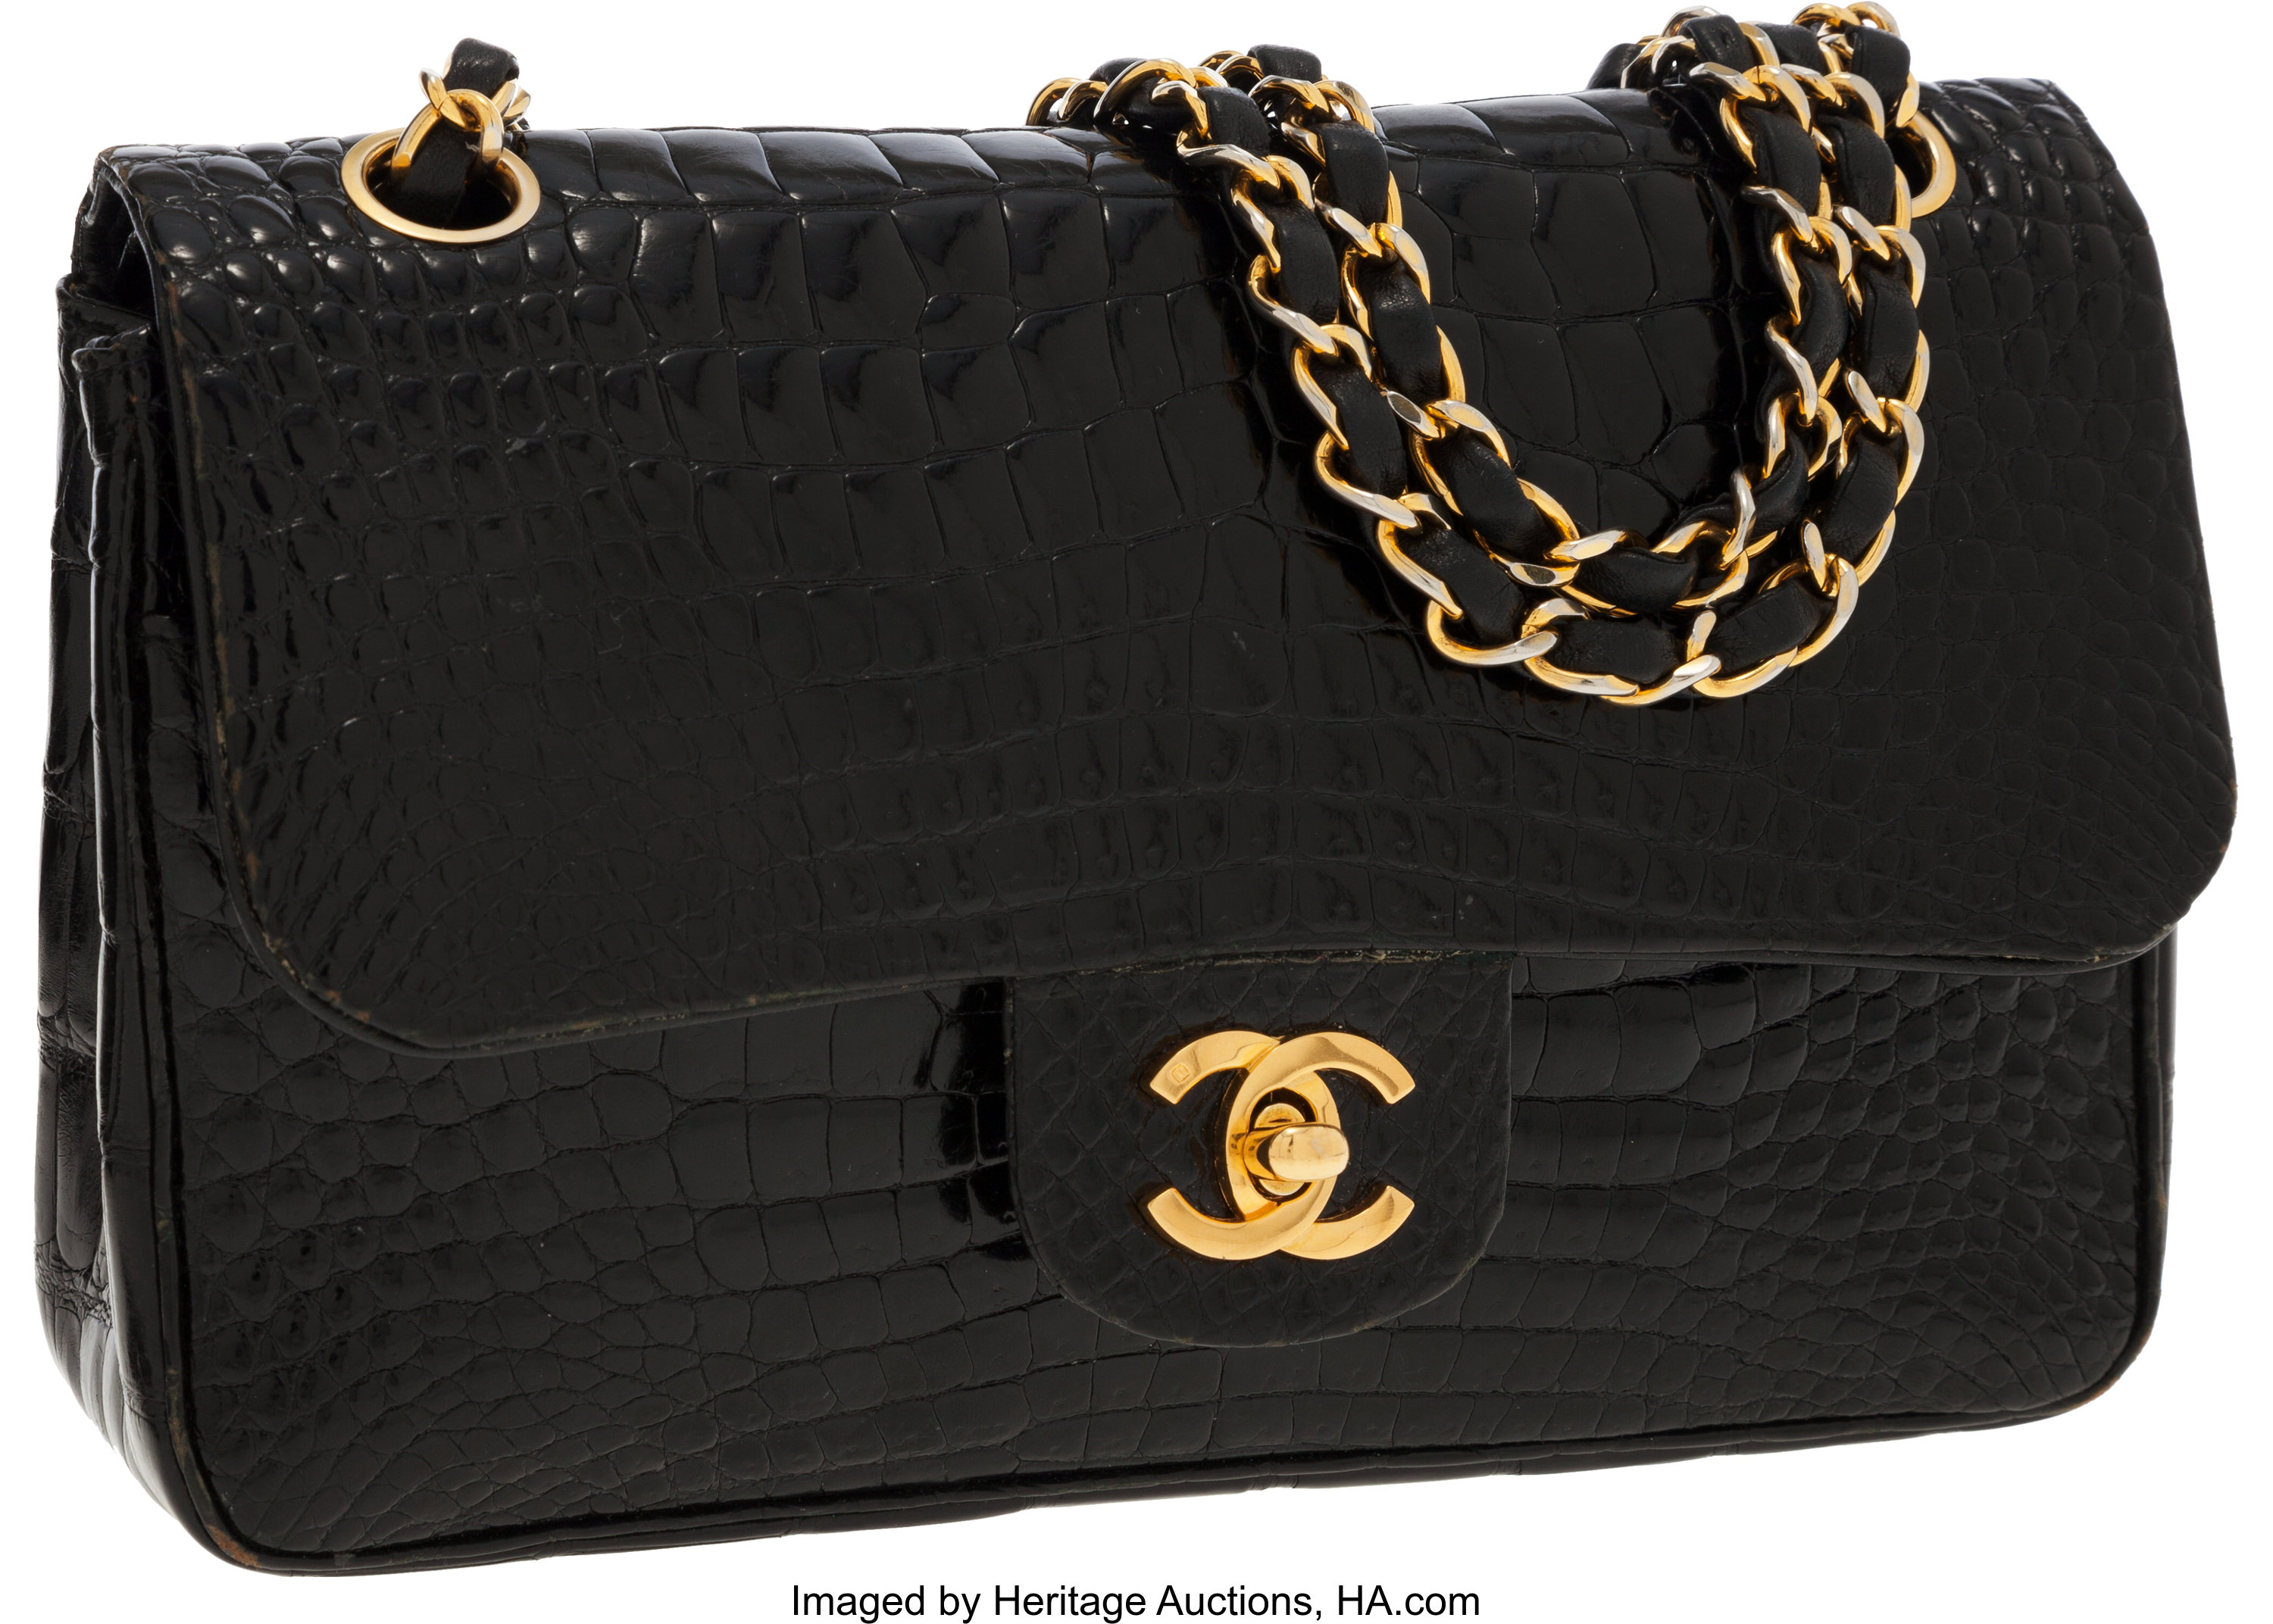 Chanel Shiny Black Crocodile Medium Double Flap Bag with Gold | Lot #56220  | Heritage Auctions